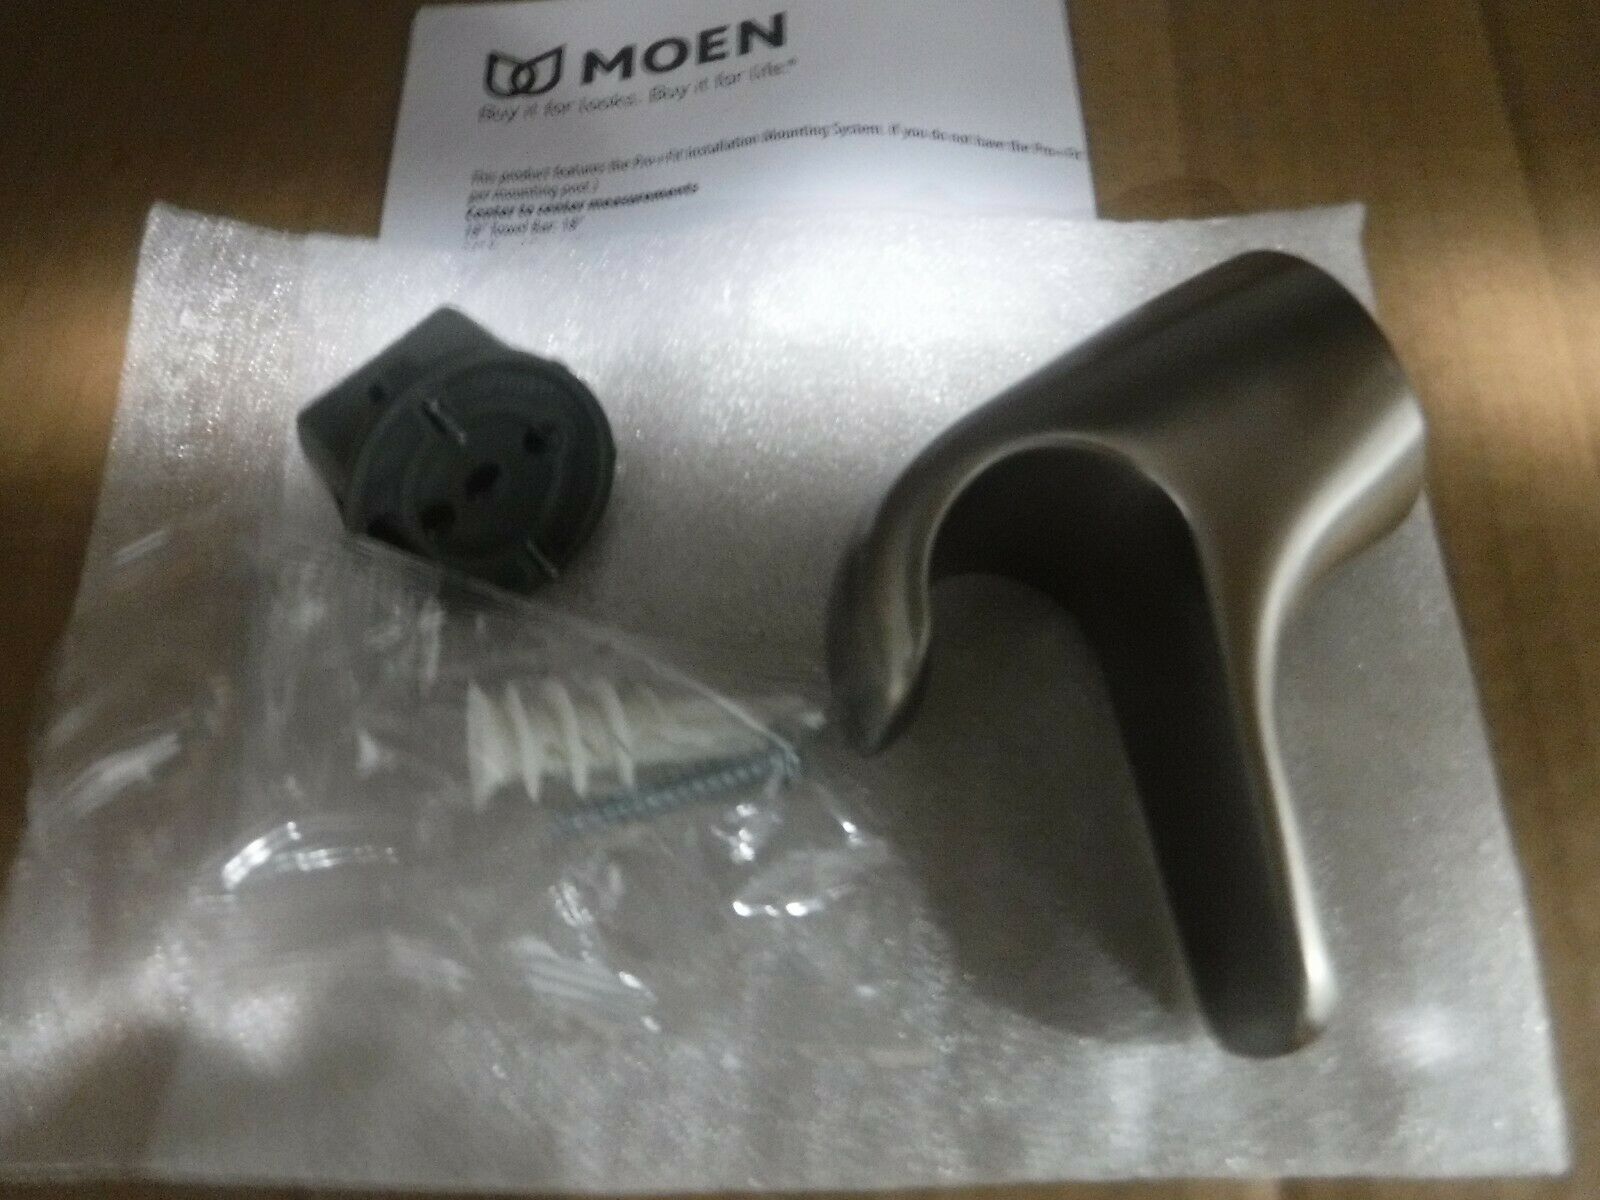 Moen Yb2403bn Brushed Nickel Robe Hook From The Method Collection New.